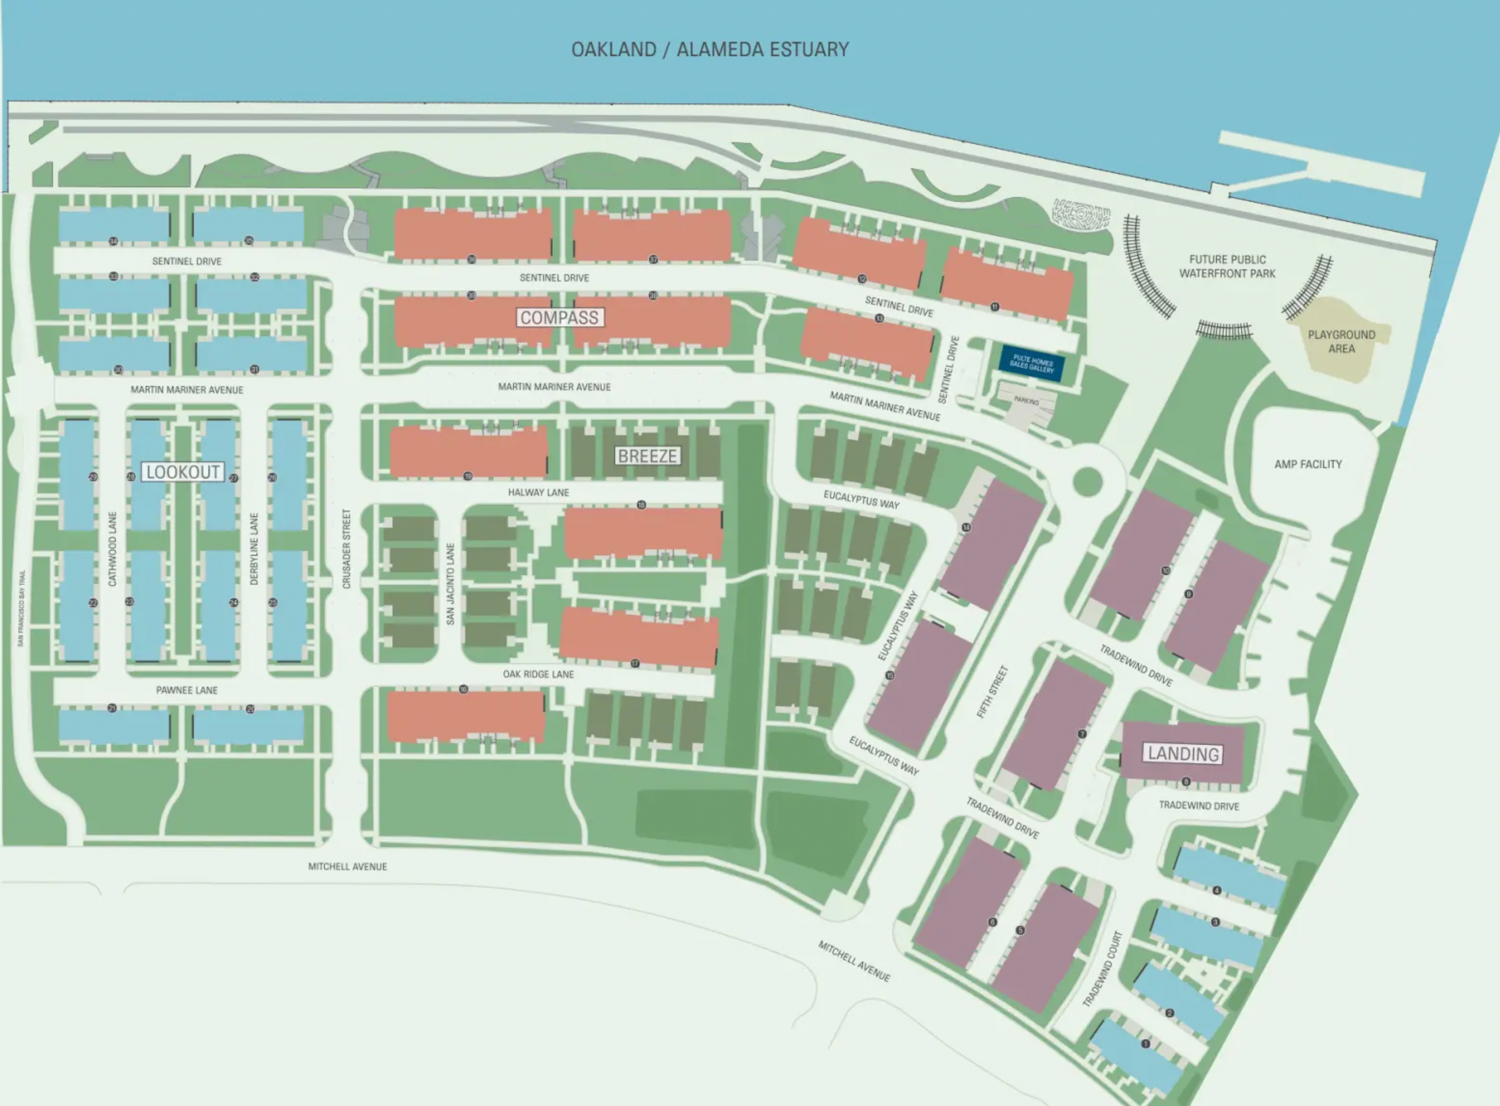 Alameda Landing Bay 37 development map, with LOOKOUT on the far left of the image, map courtesy Pulte Homes